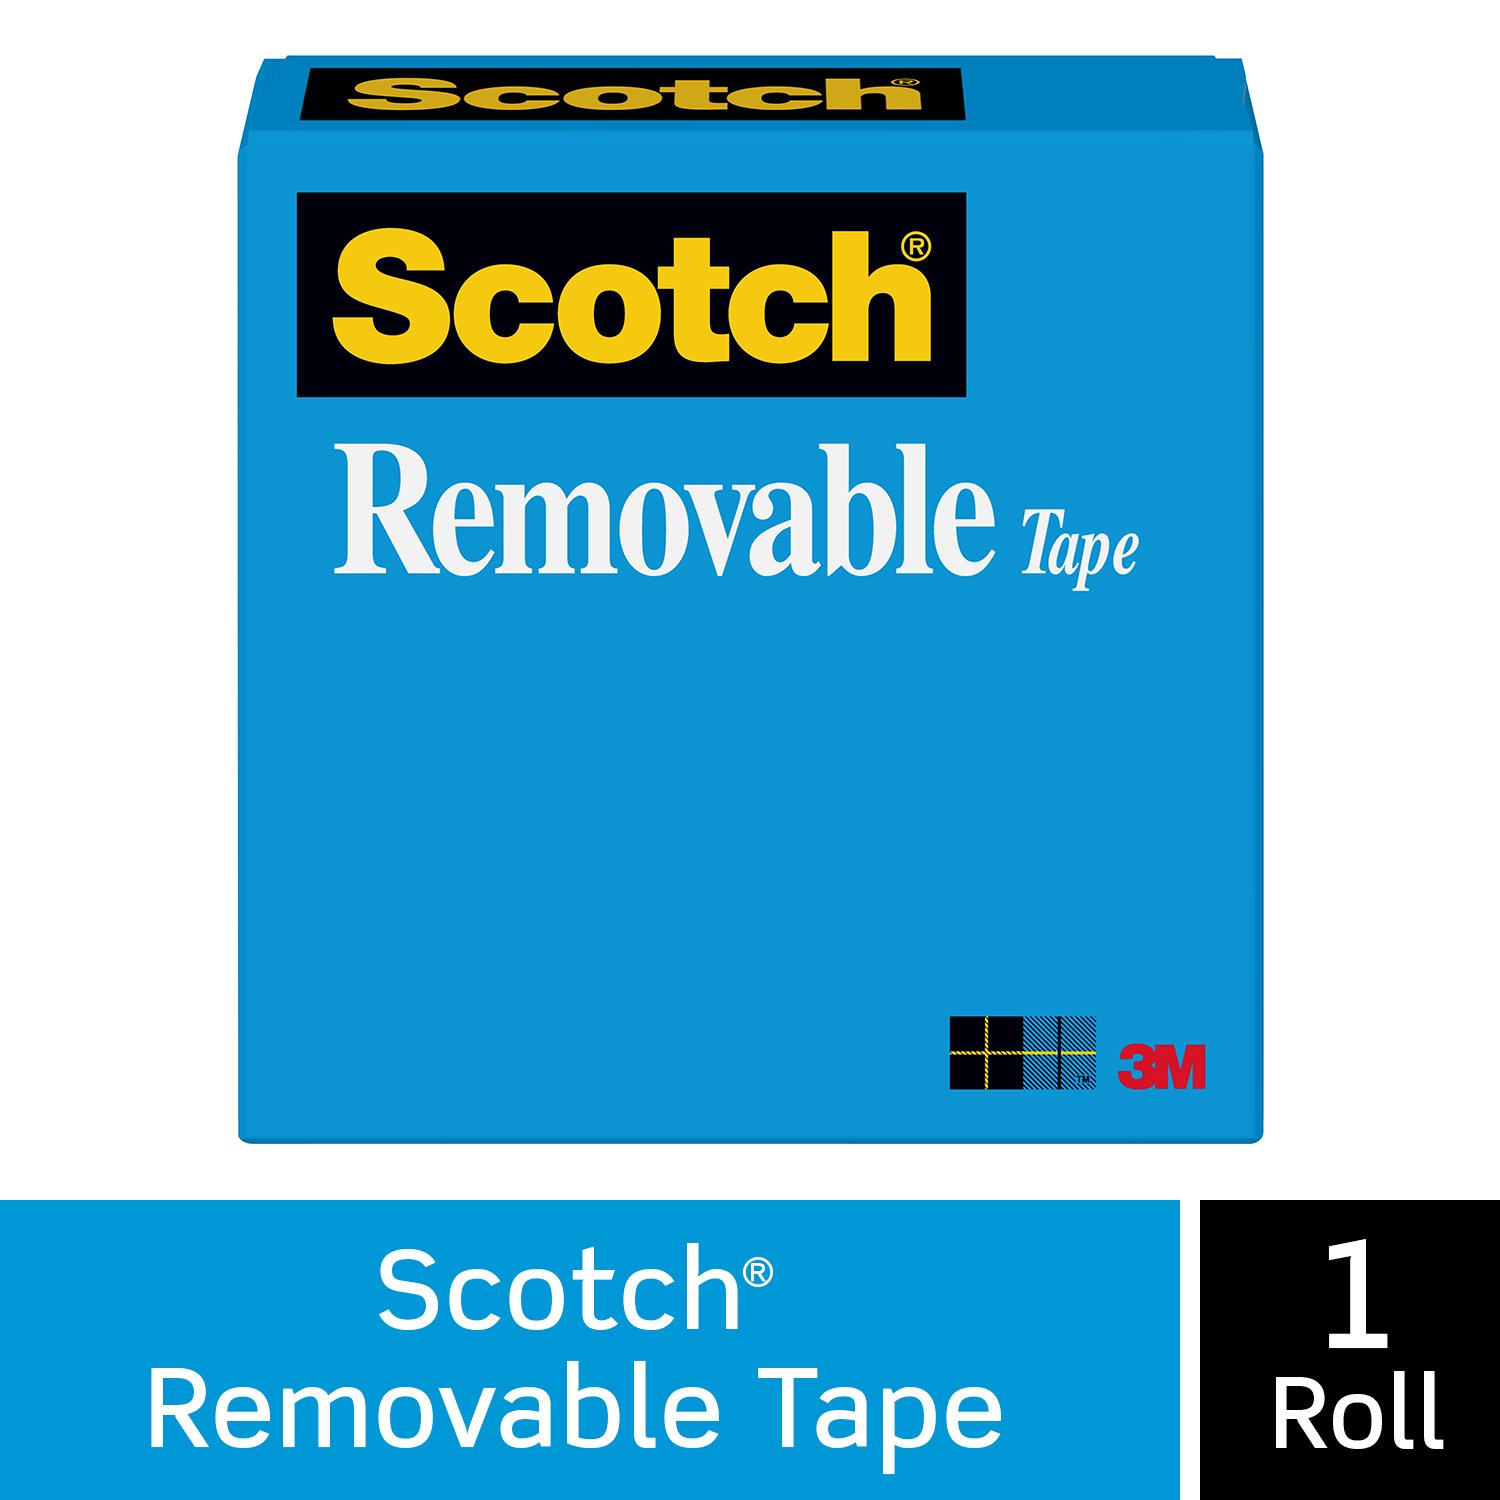 7010314399 - Scotch Removable Tape 811, 1/2 in x 1296 in Boxed